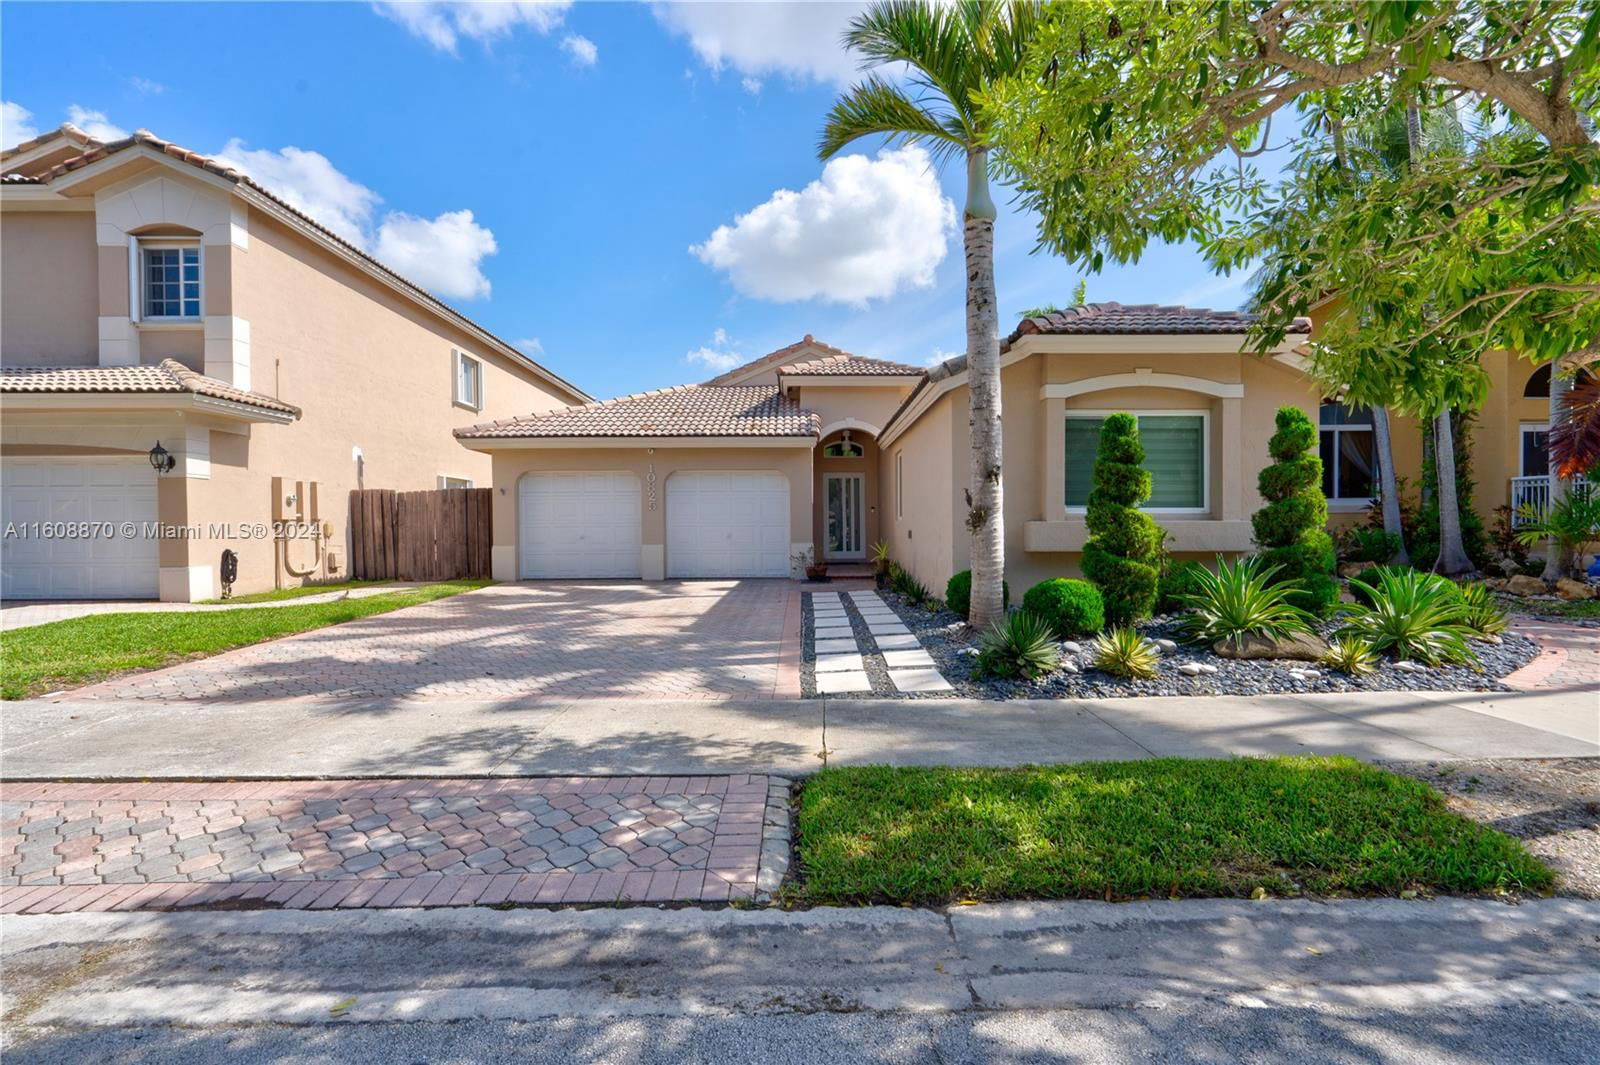 Real estate property located at 10825 73rd Ter, Miami-Dade County, DORAL ISLES ST CROIX, Doral, FL